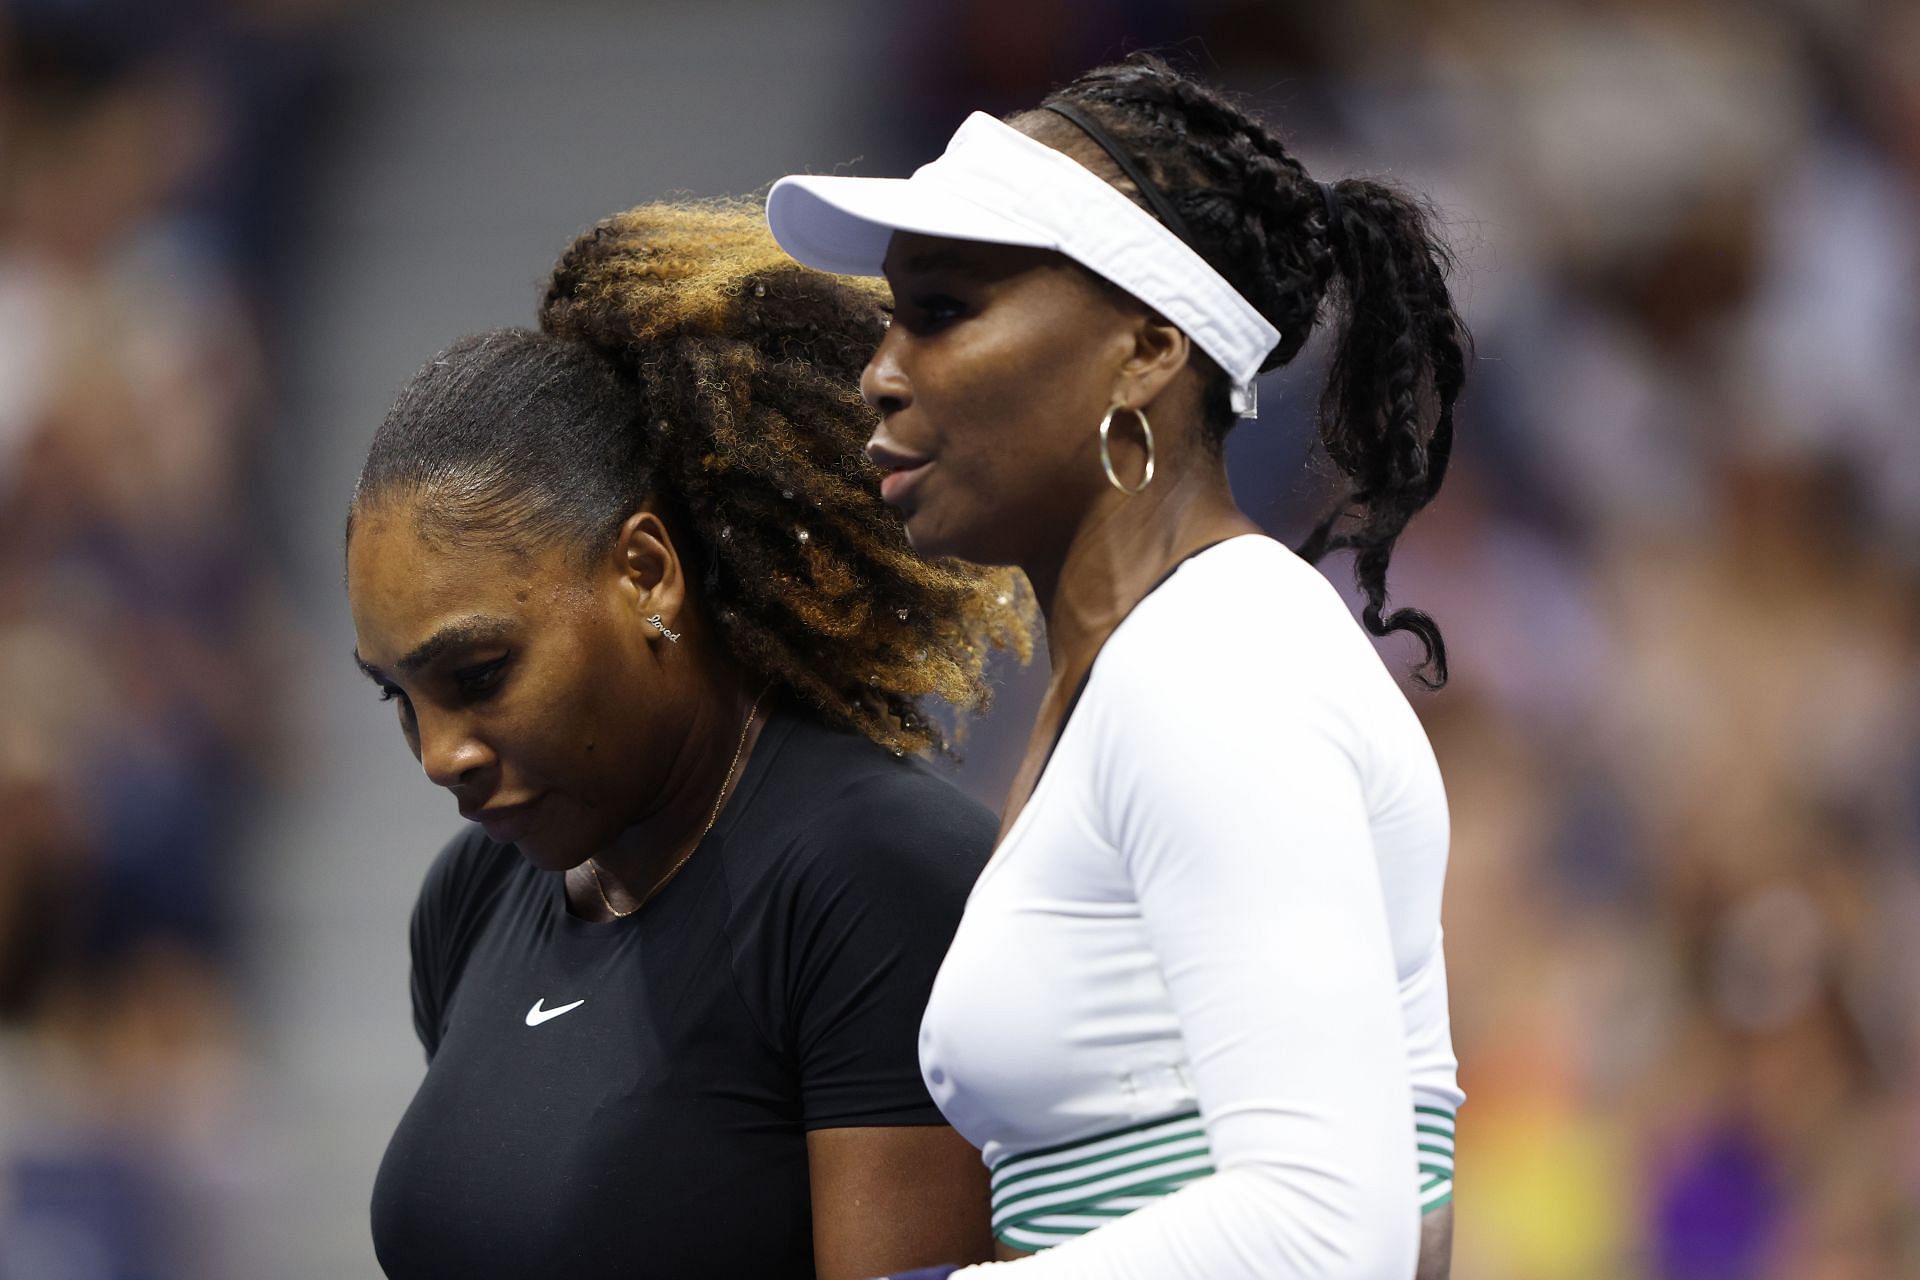 Serena Williams and Venus Williams during their match against Lucie Hradecka and Linda Noskova at the 2022 US Open